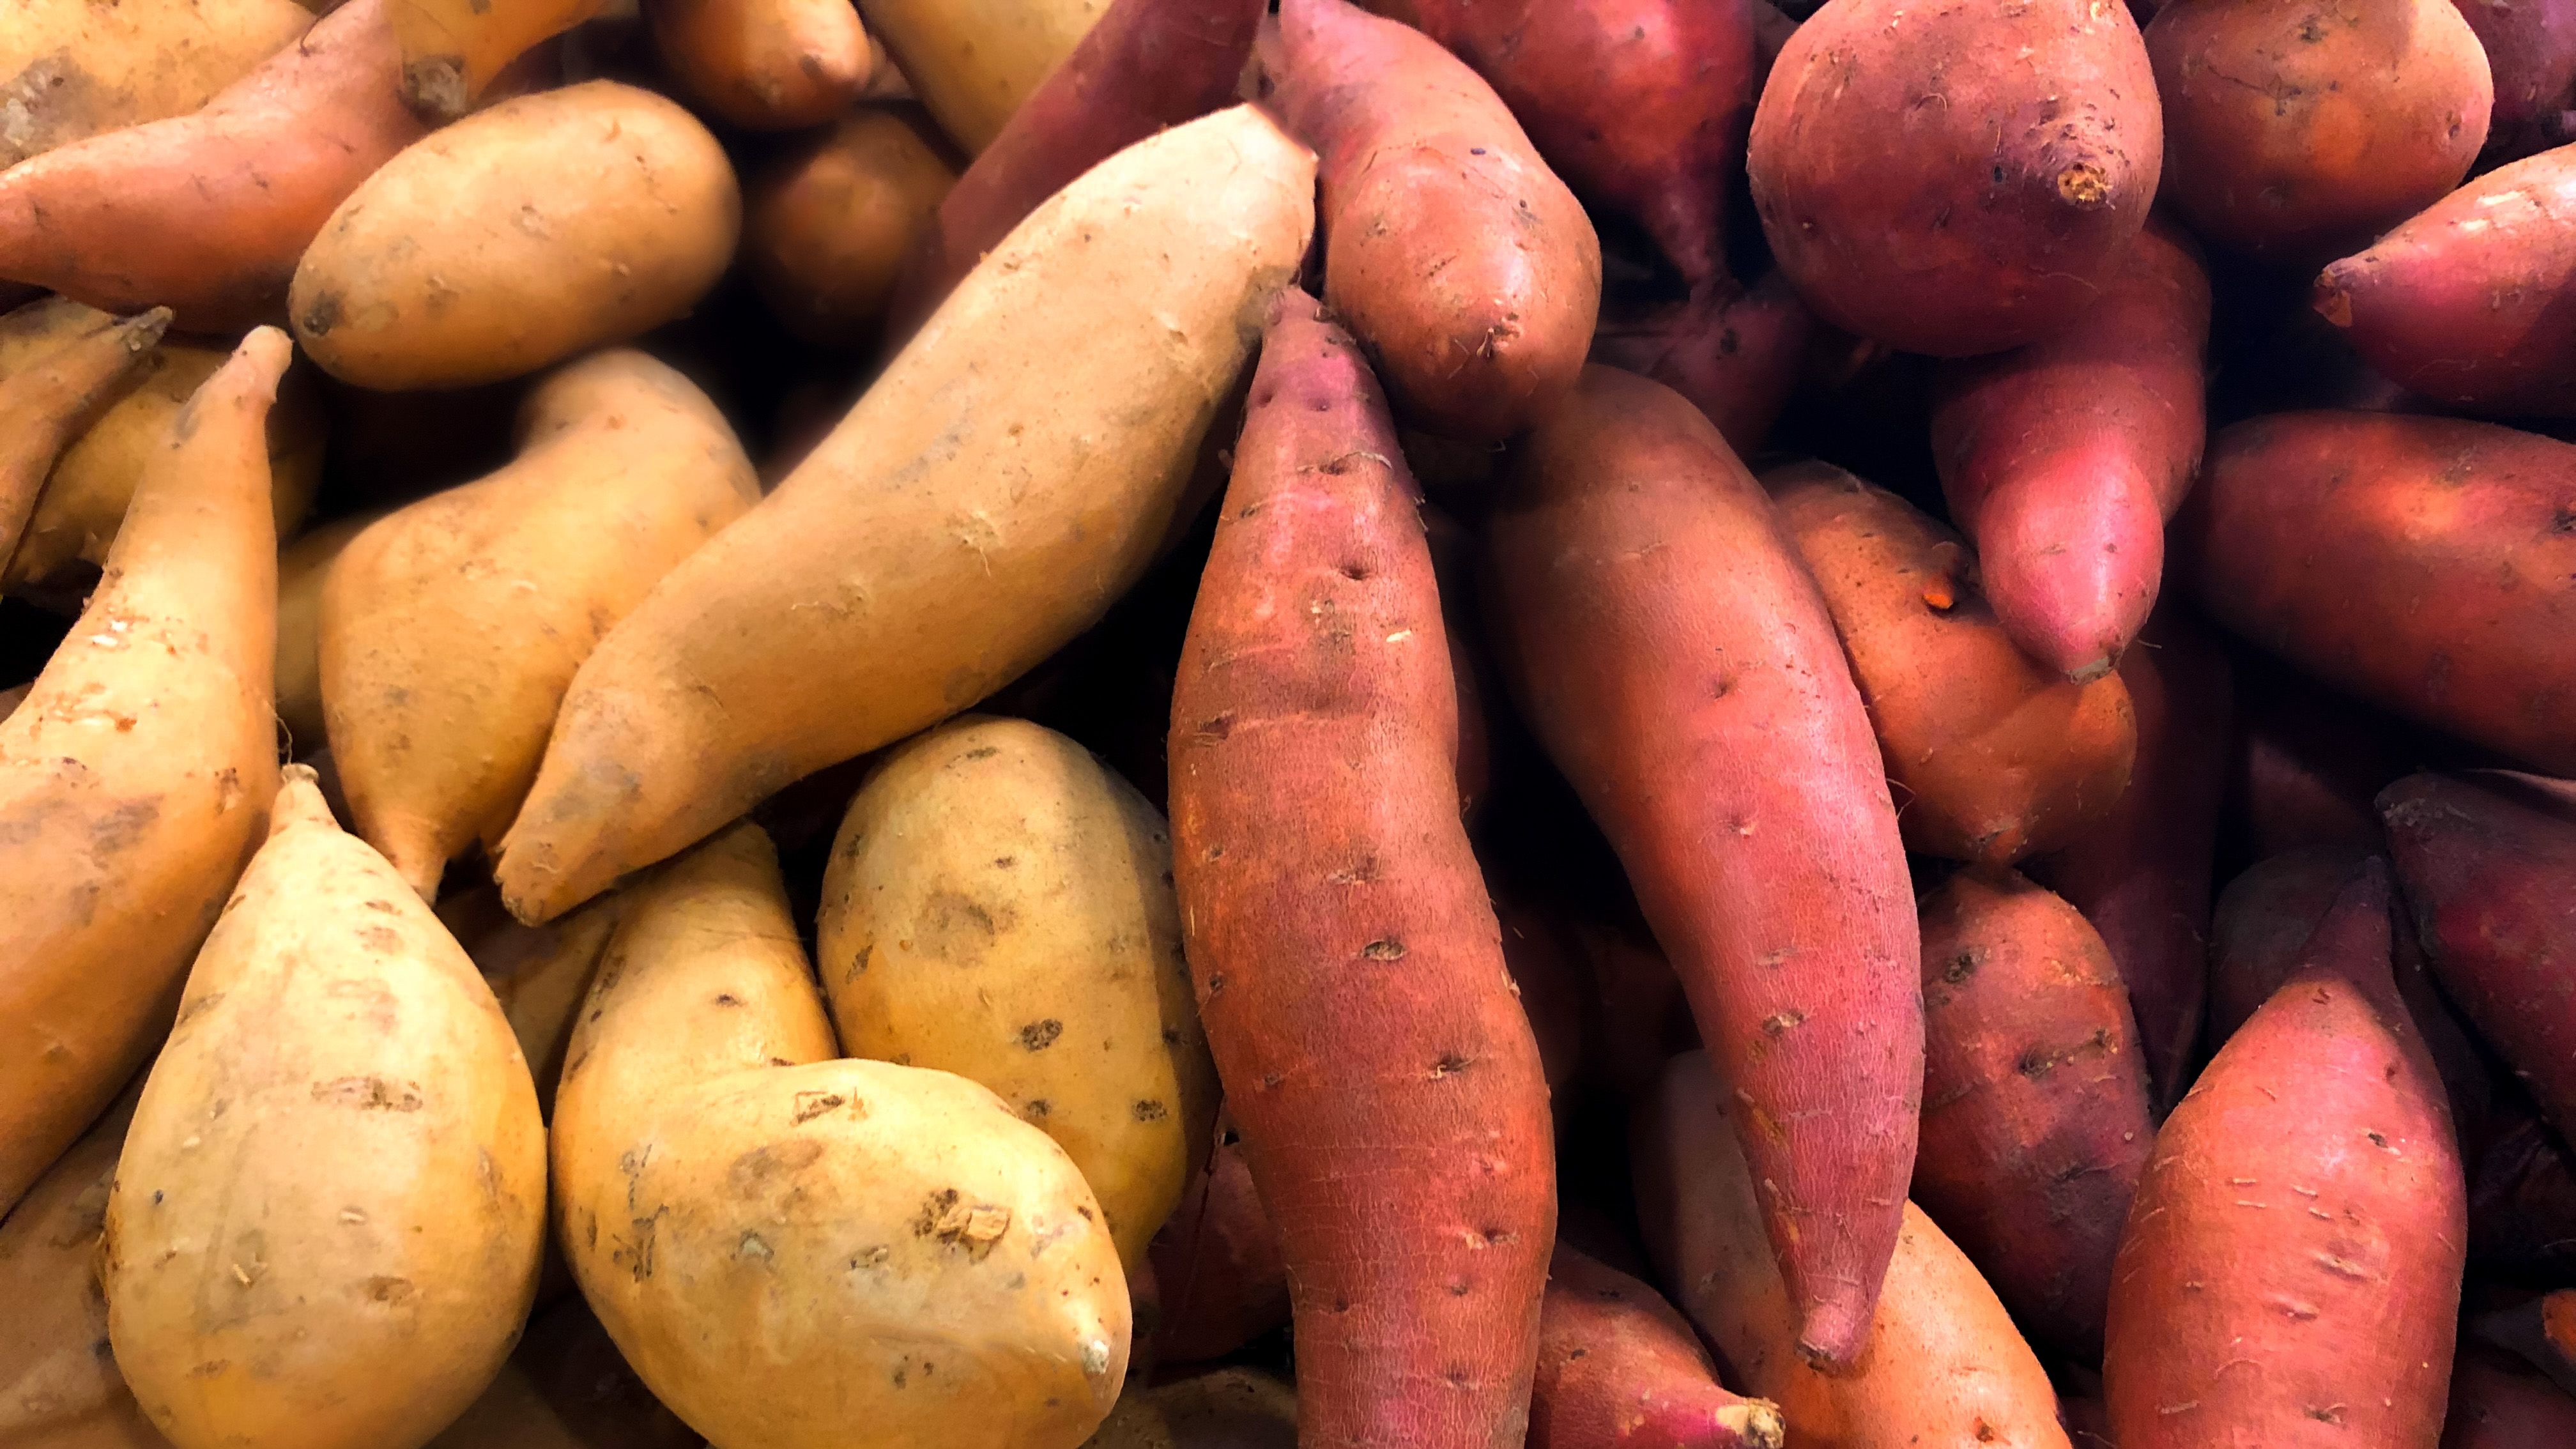 https://hips.hearstapps.com/hmg-prod/images/heaps-of-fresh-organic-white-sweet-potatoes-at-royalty-free-image-1695920113.jpg?crop=1xw:0.75xh;center,top